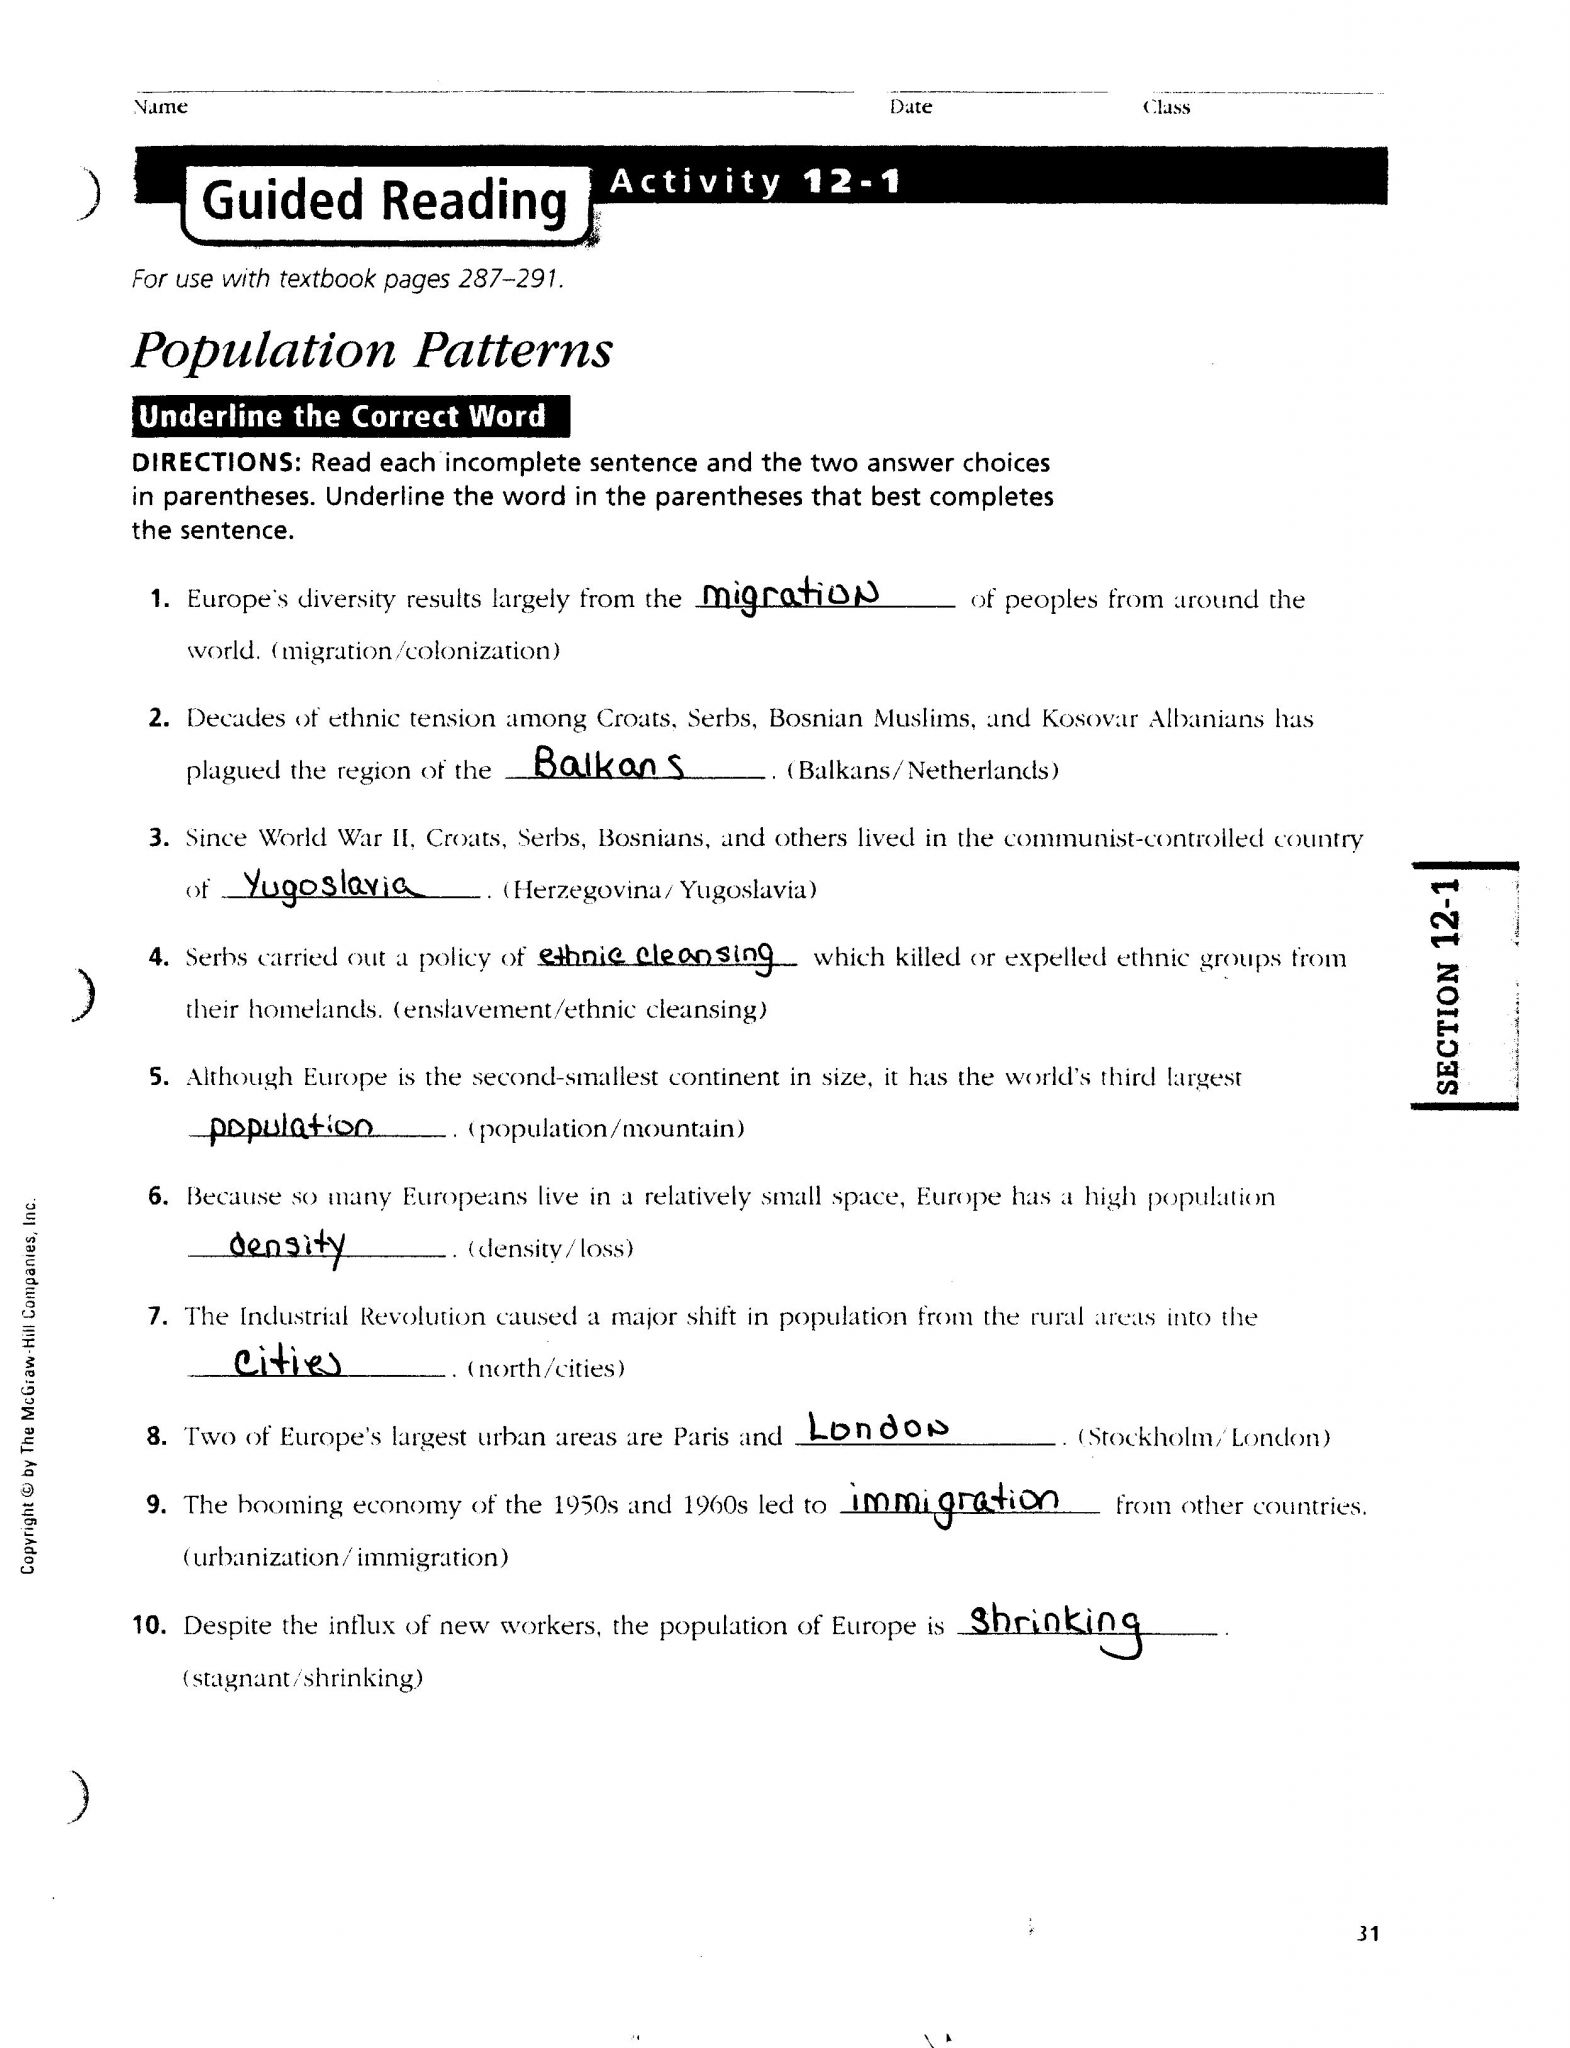 America The Story Of Us Civil War Worksheet Answers